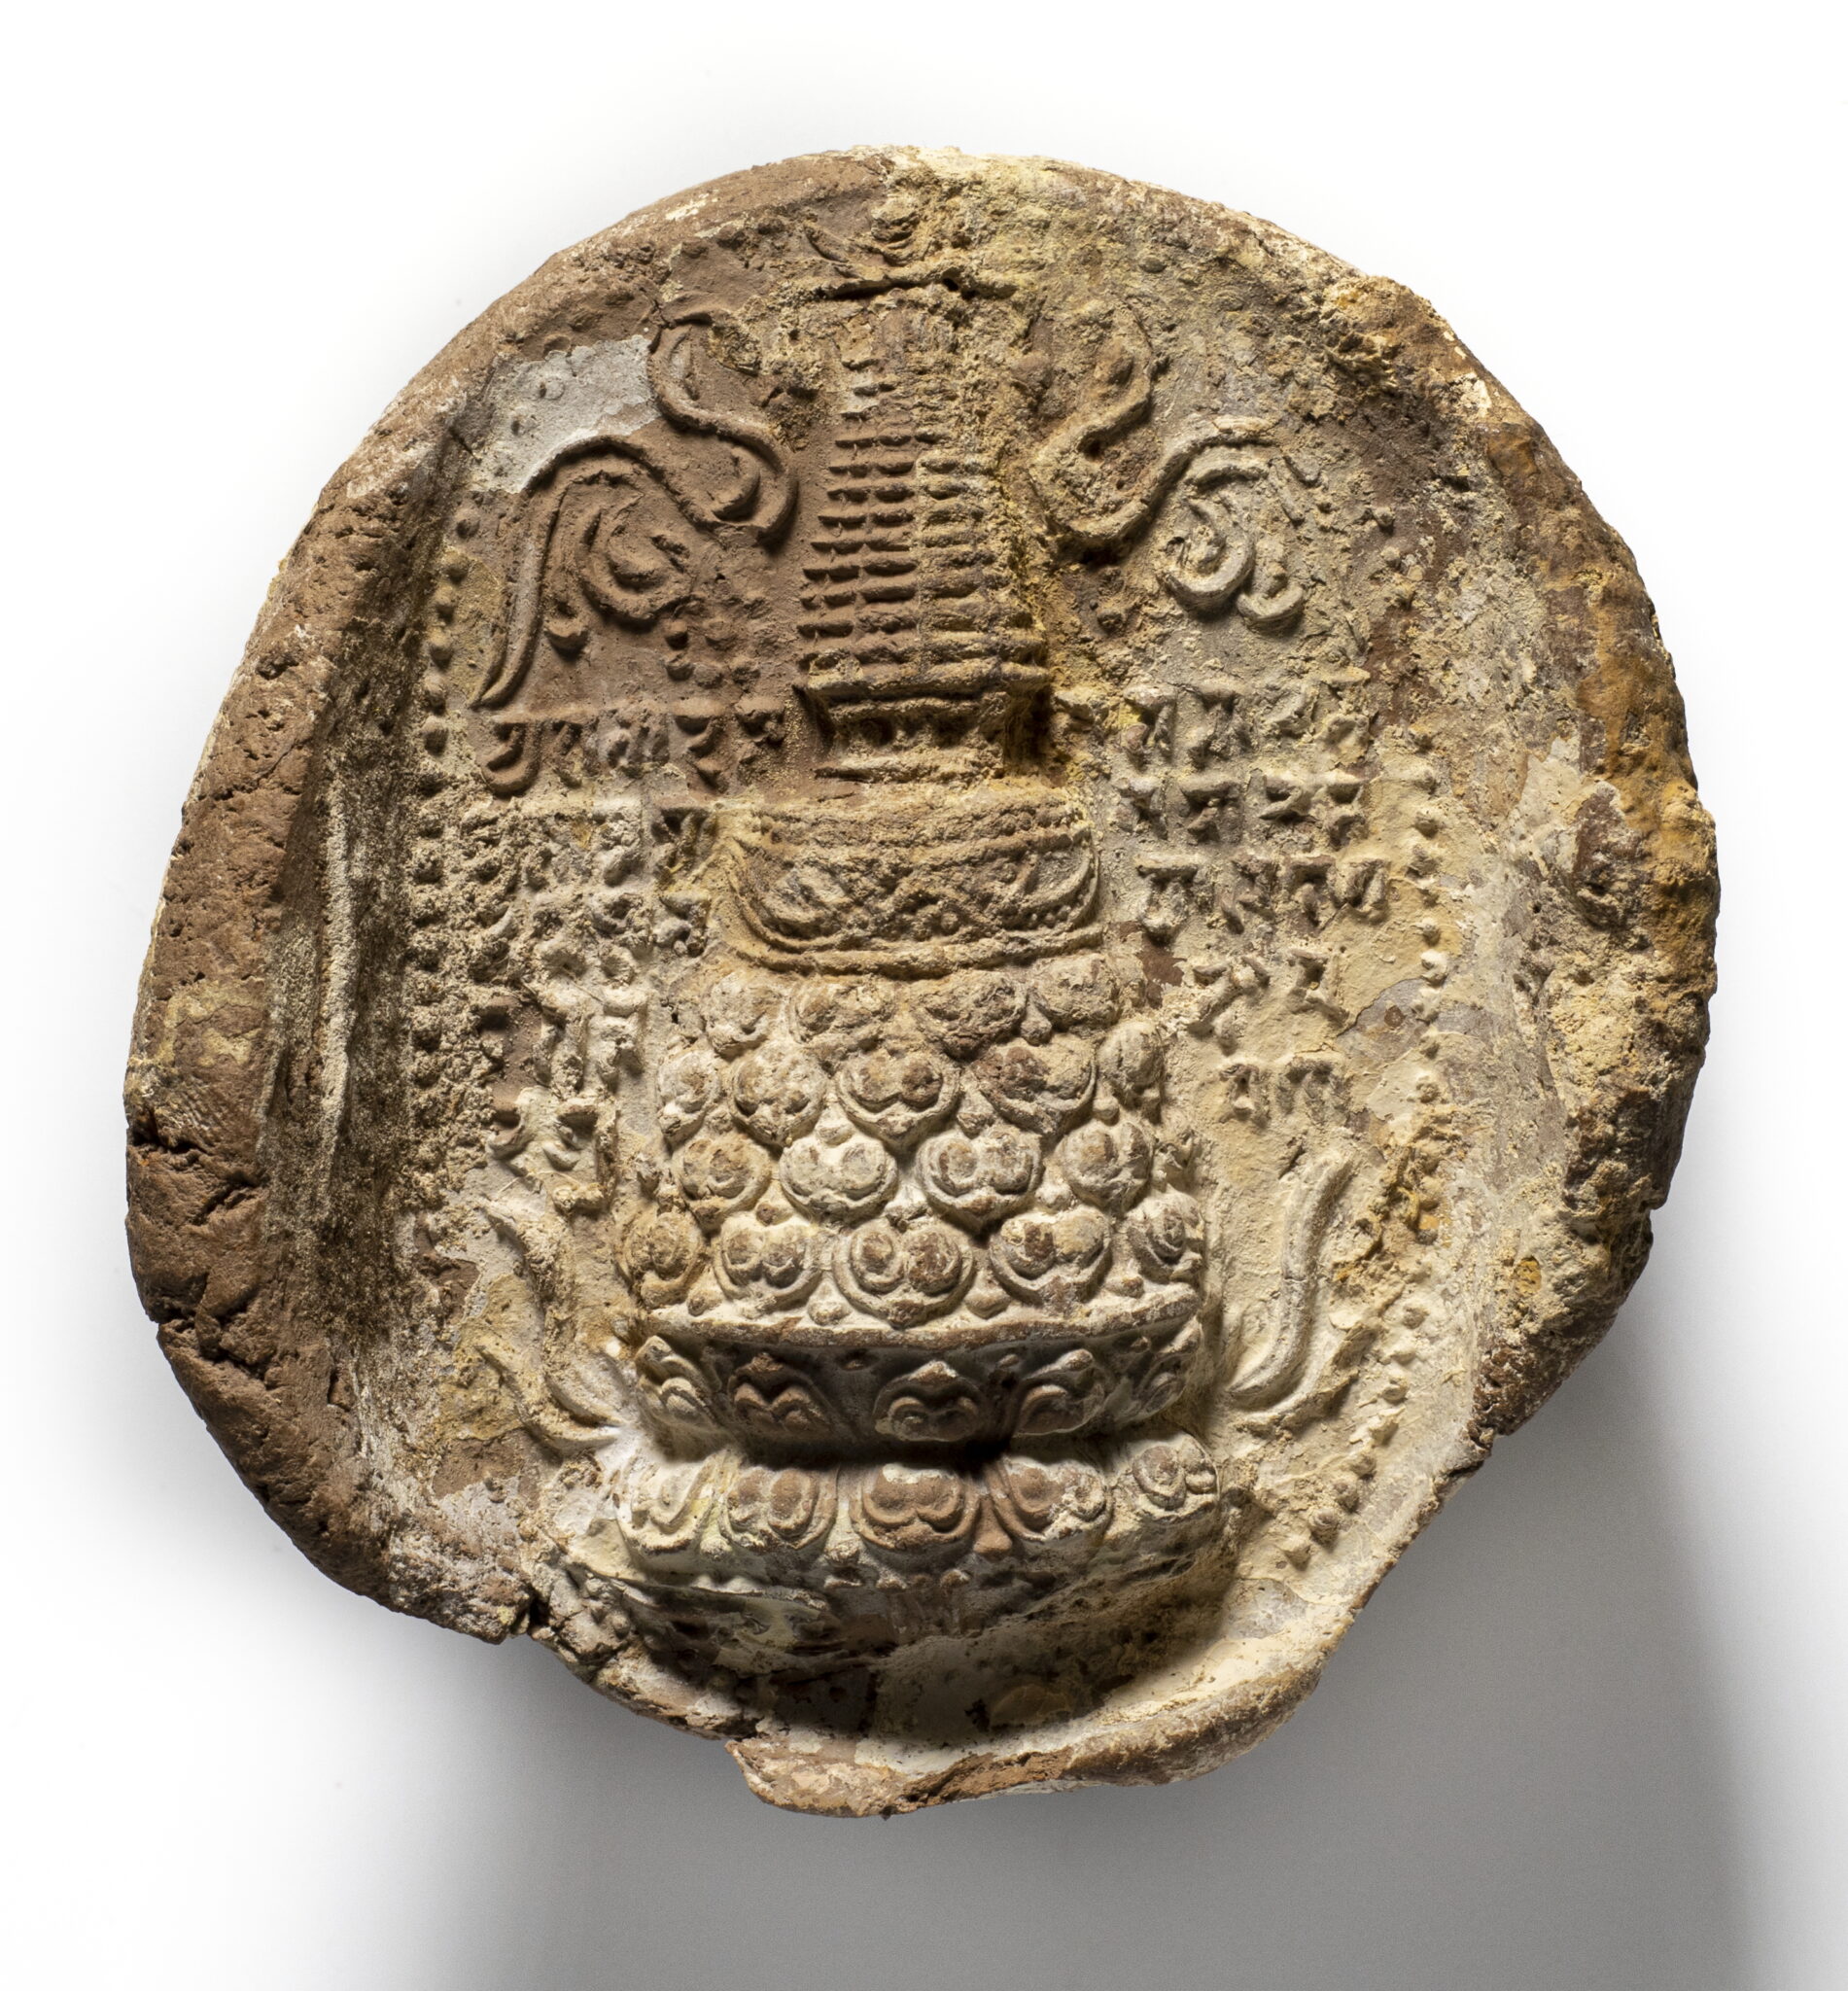 Mottled brown clay roundel featuring stupa decorated with lotus motif and banners amid Tibetan text